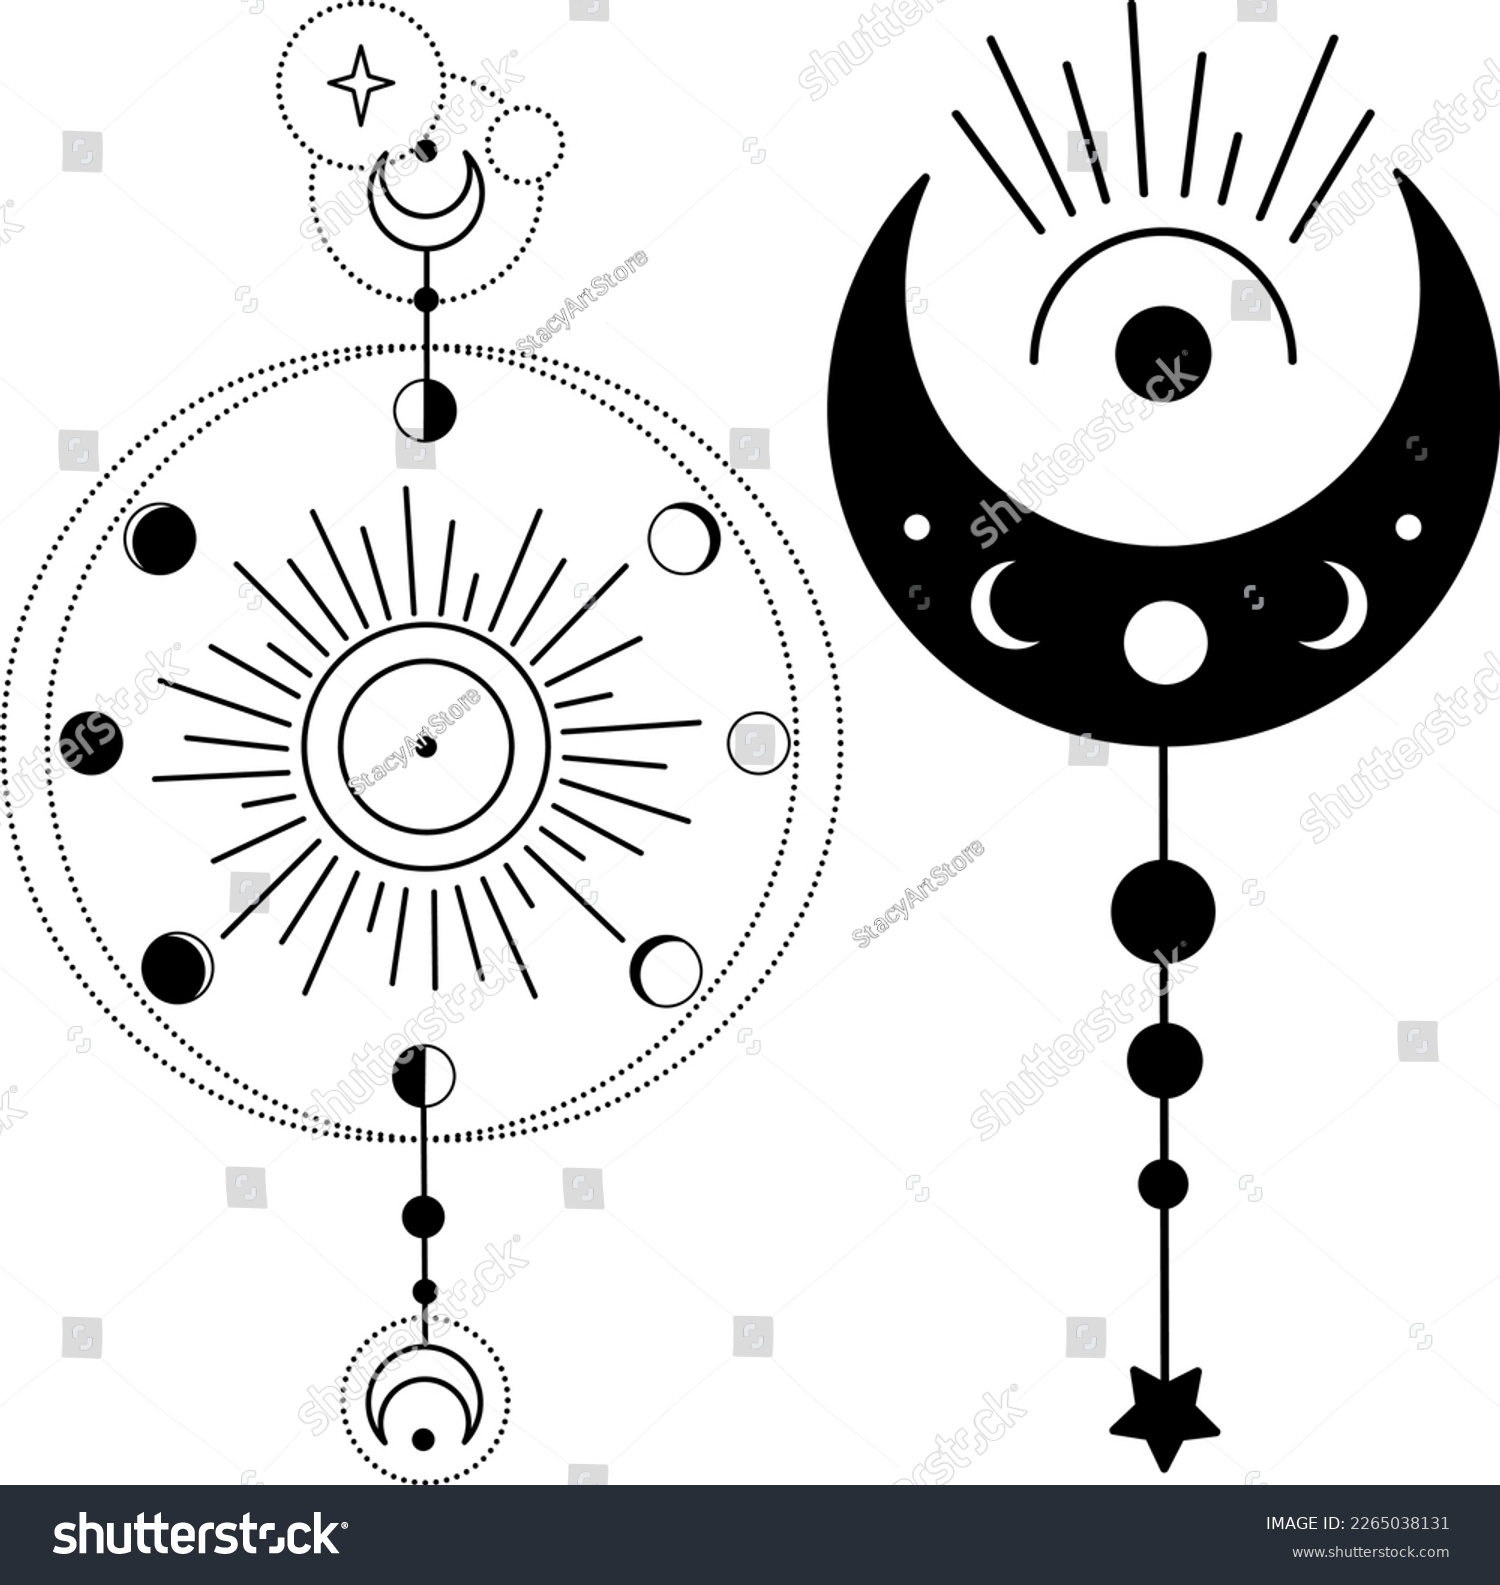 SVG of Bohemian Crescent Moon with Stars and Rays Astrology Illustration. Moon Phases SVG Vector Clipart. Celestial, Mystical, Esoteric designs perfect for Printing. T-shirt, Mugs Cut File. Universe Art svg